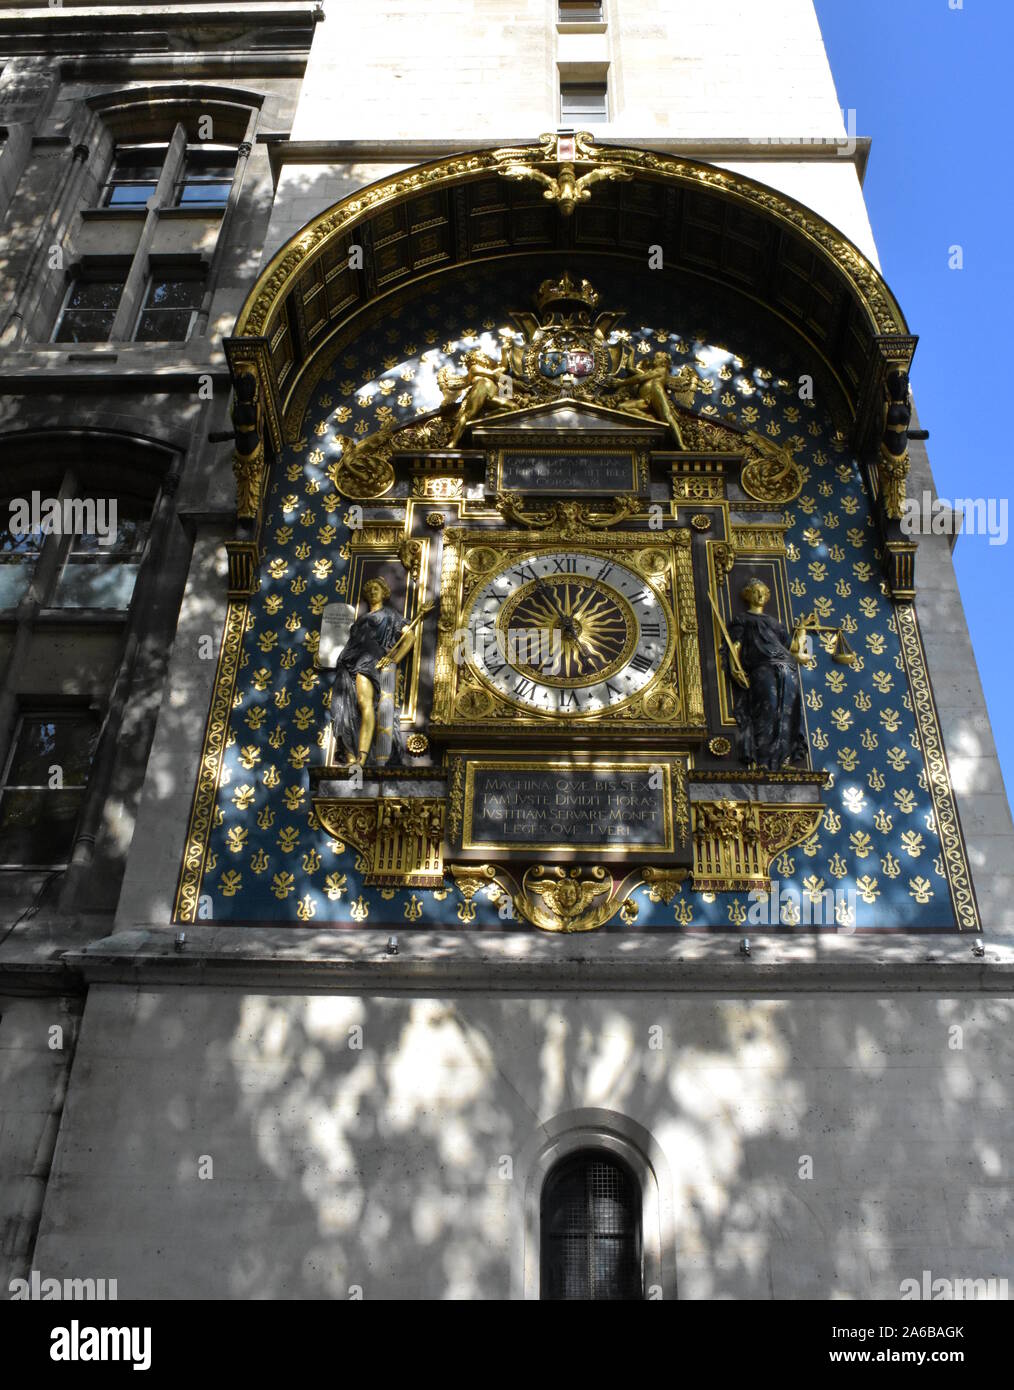 The oldest public clock in France picture